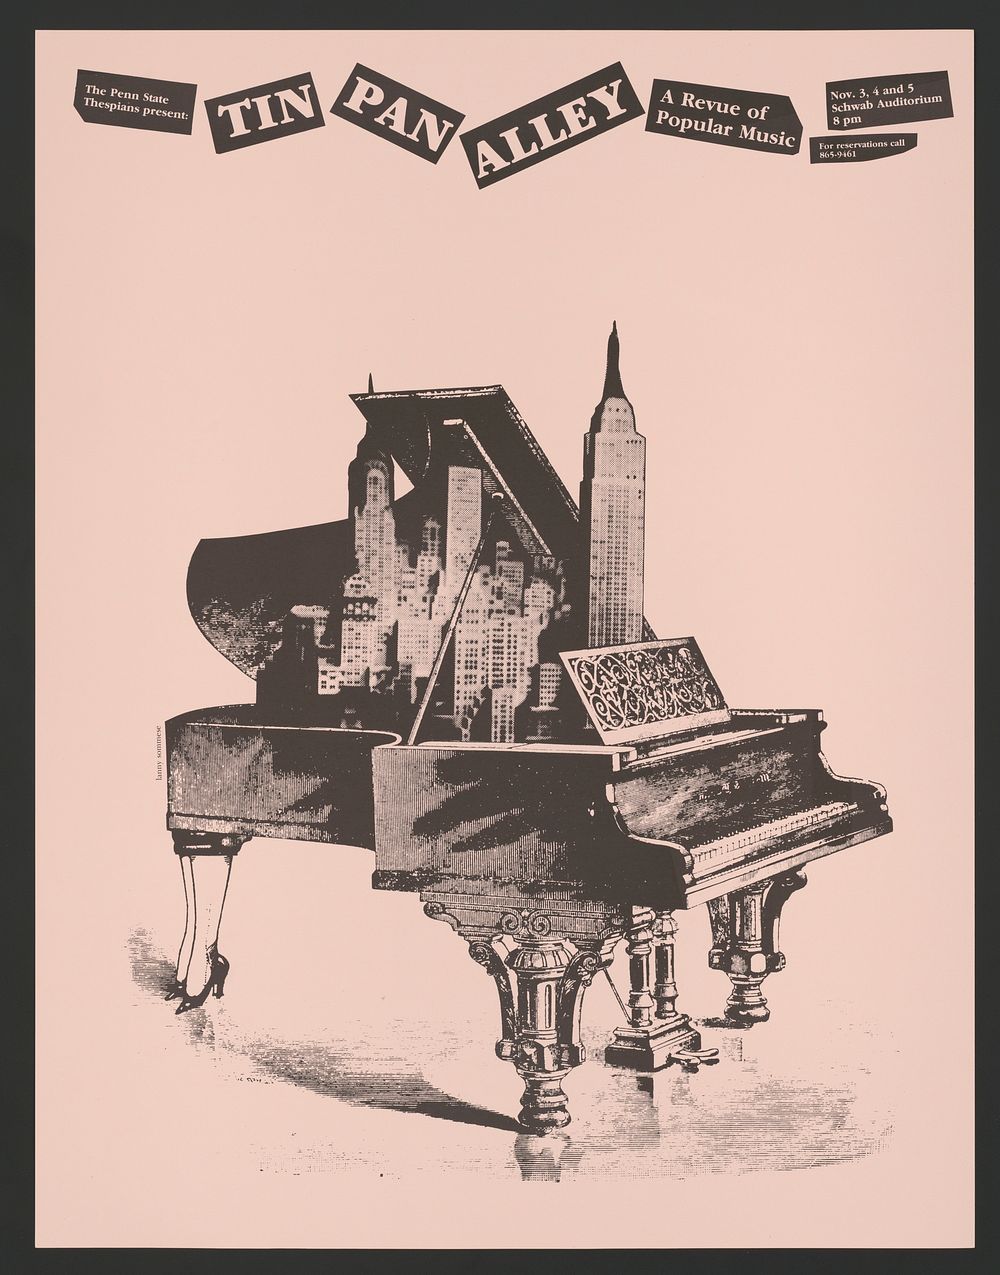 Tin pan alley - a revue of popular music (1980) poster by Lanny Sommese.  Original public domain image from Library of…